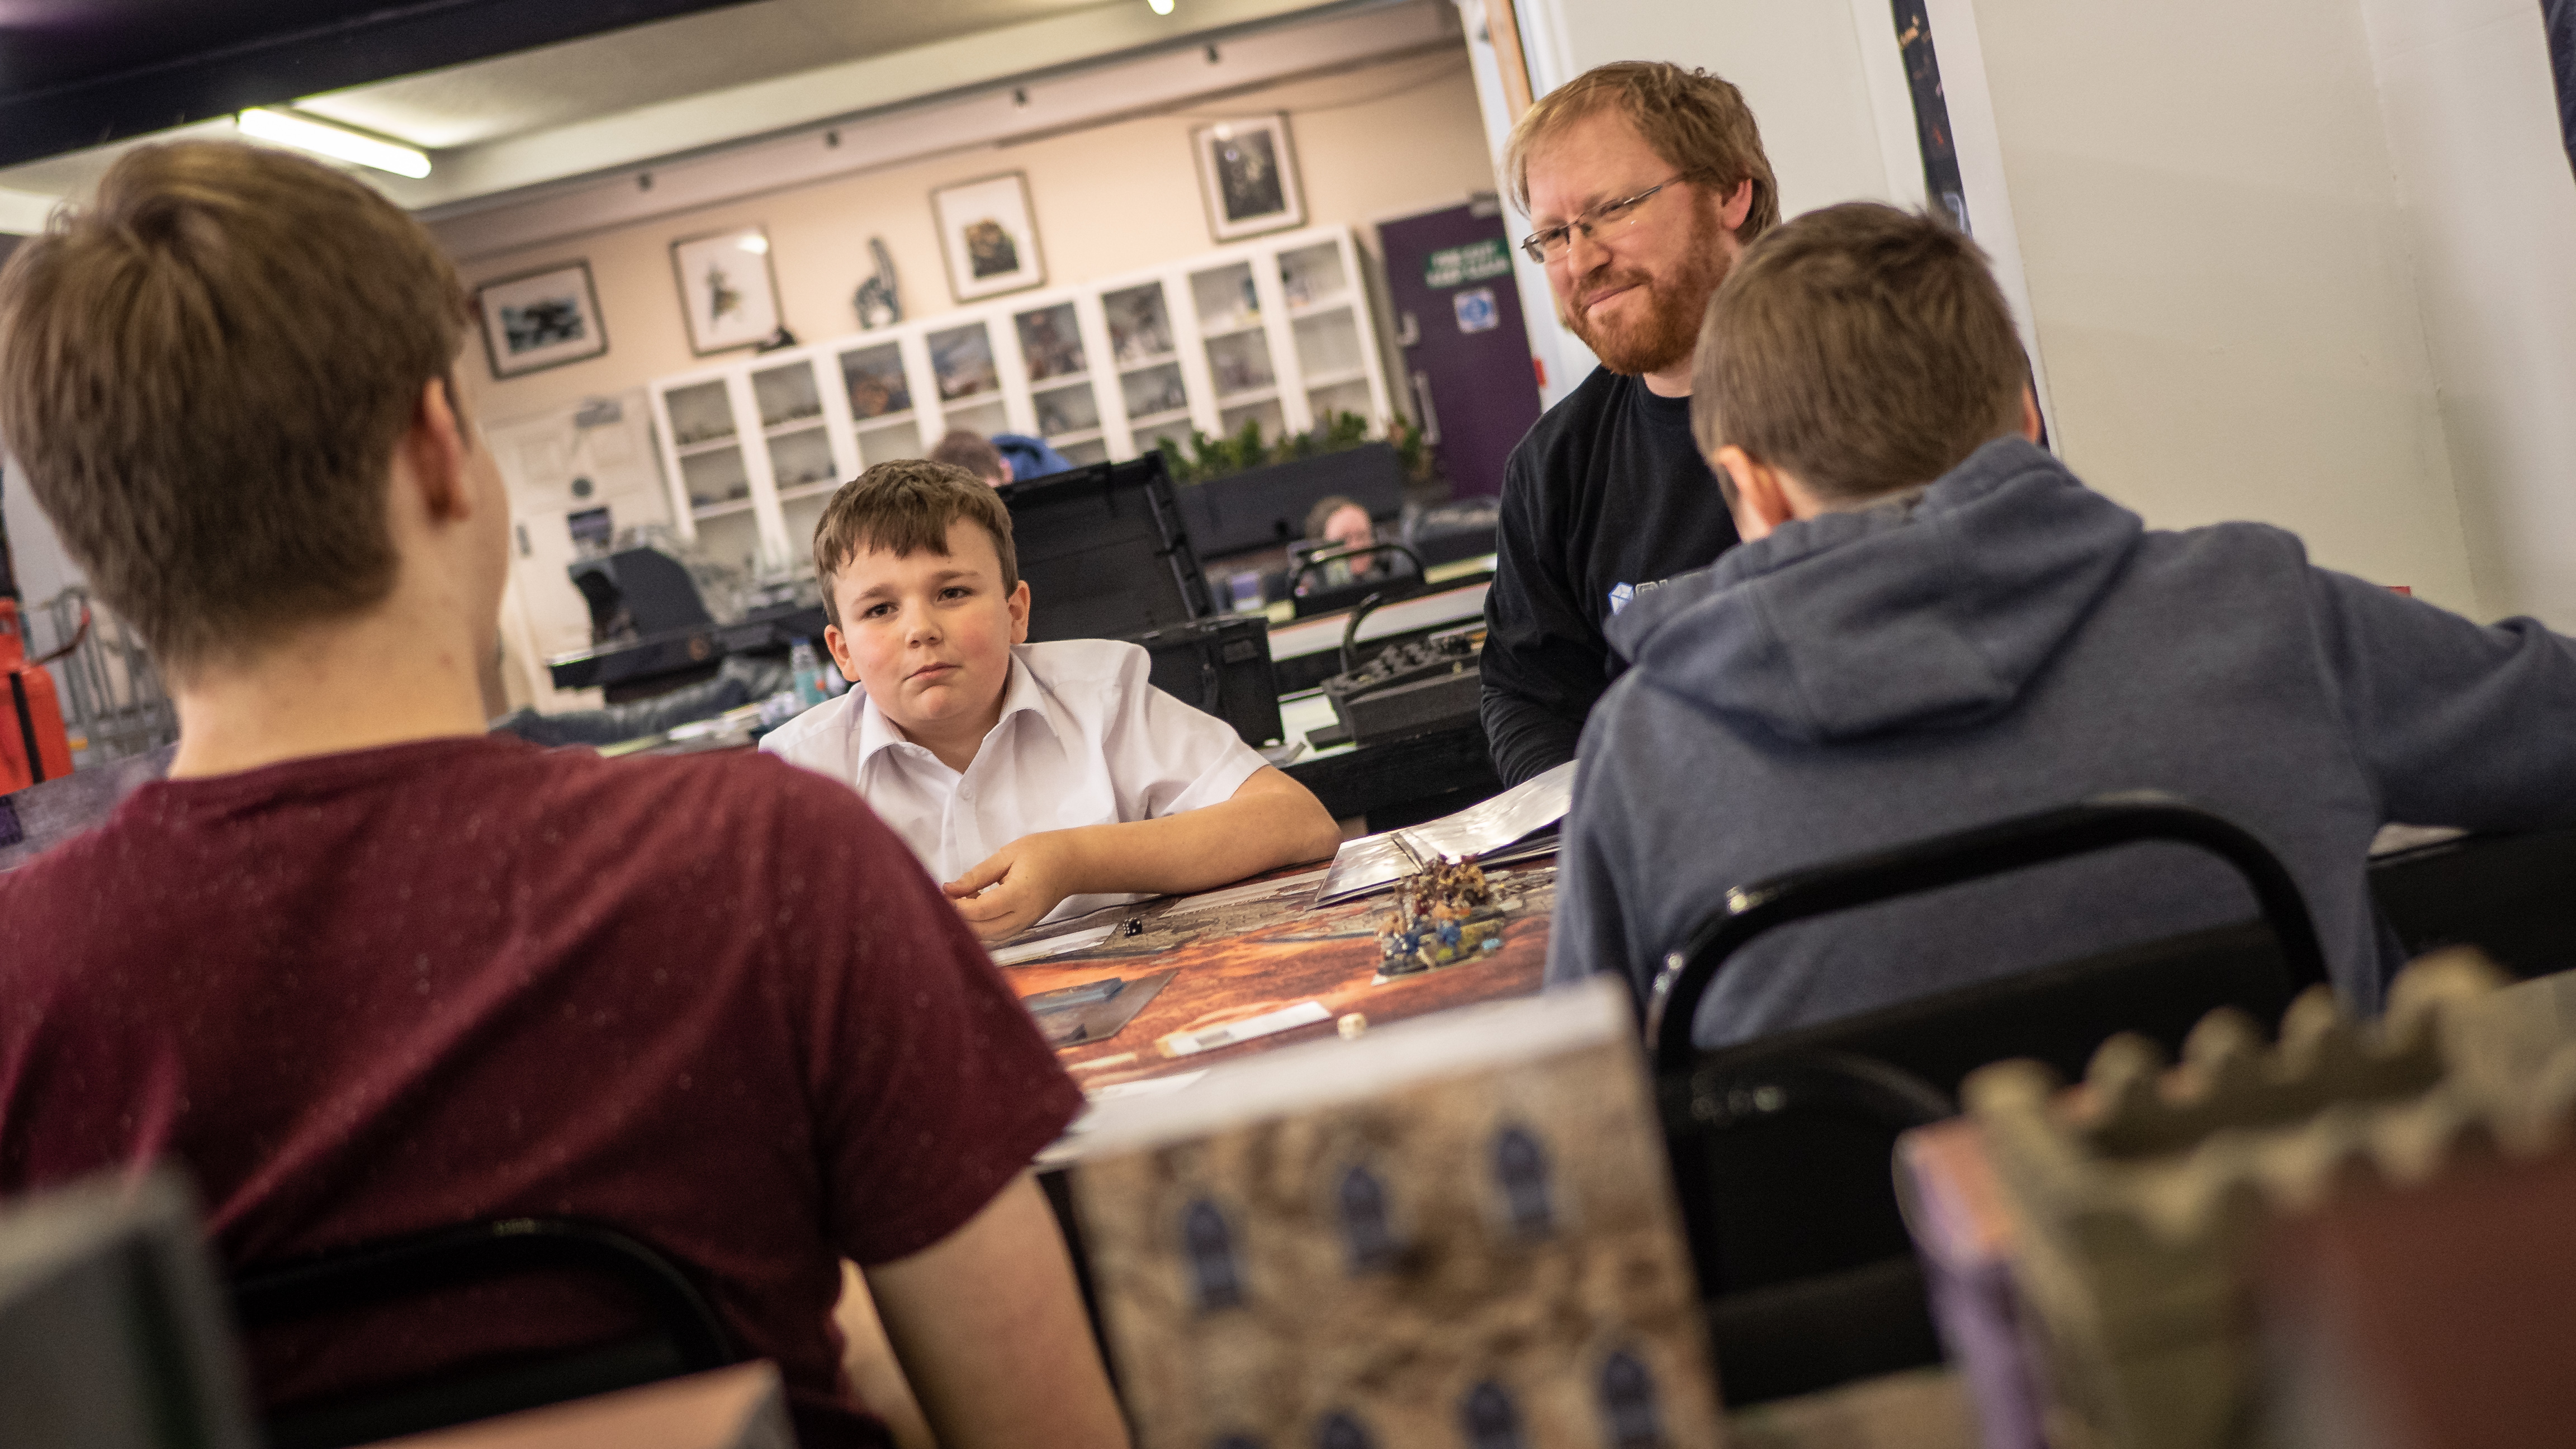 Running a tabletop gaming club for teens